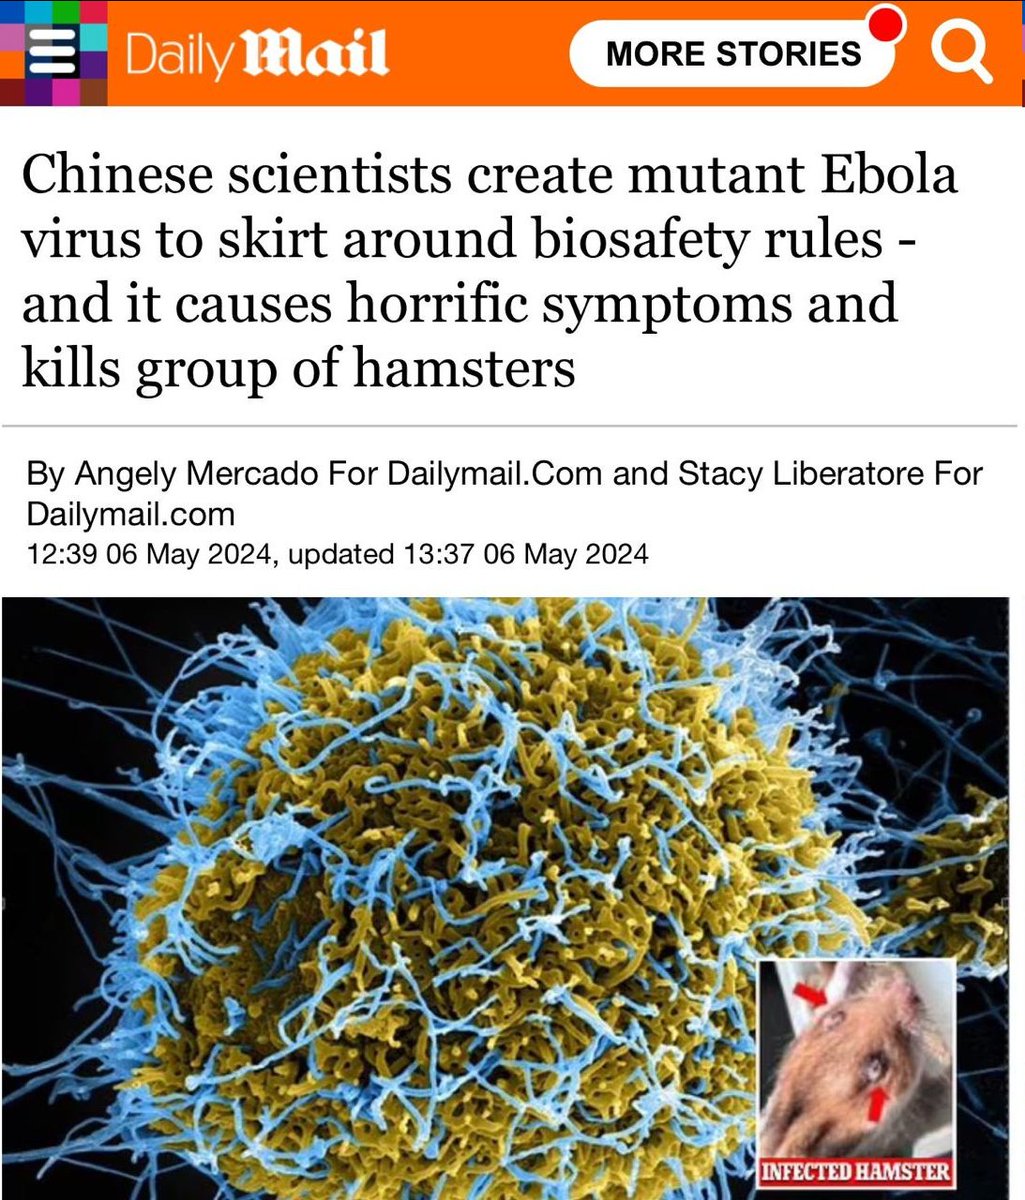 “Chinese scientists have engineered a virus with parts of Ebola in a lab that killed a group of hamsters.' A team of researchers at Hebei Medical University used a contagious disease of livestock and added a protein found in Ebola, which allows the virus to infect cells and…